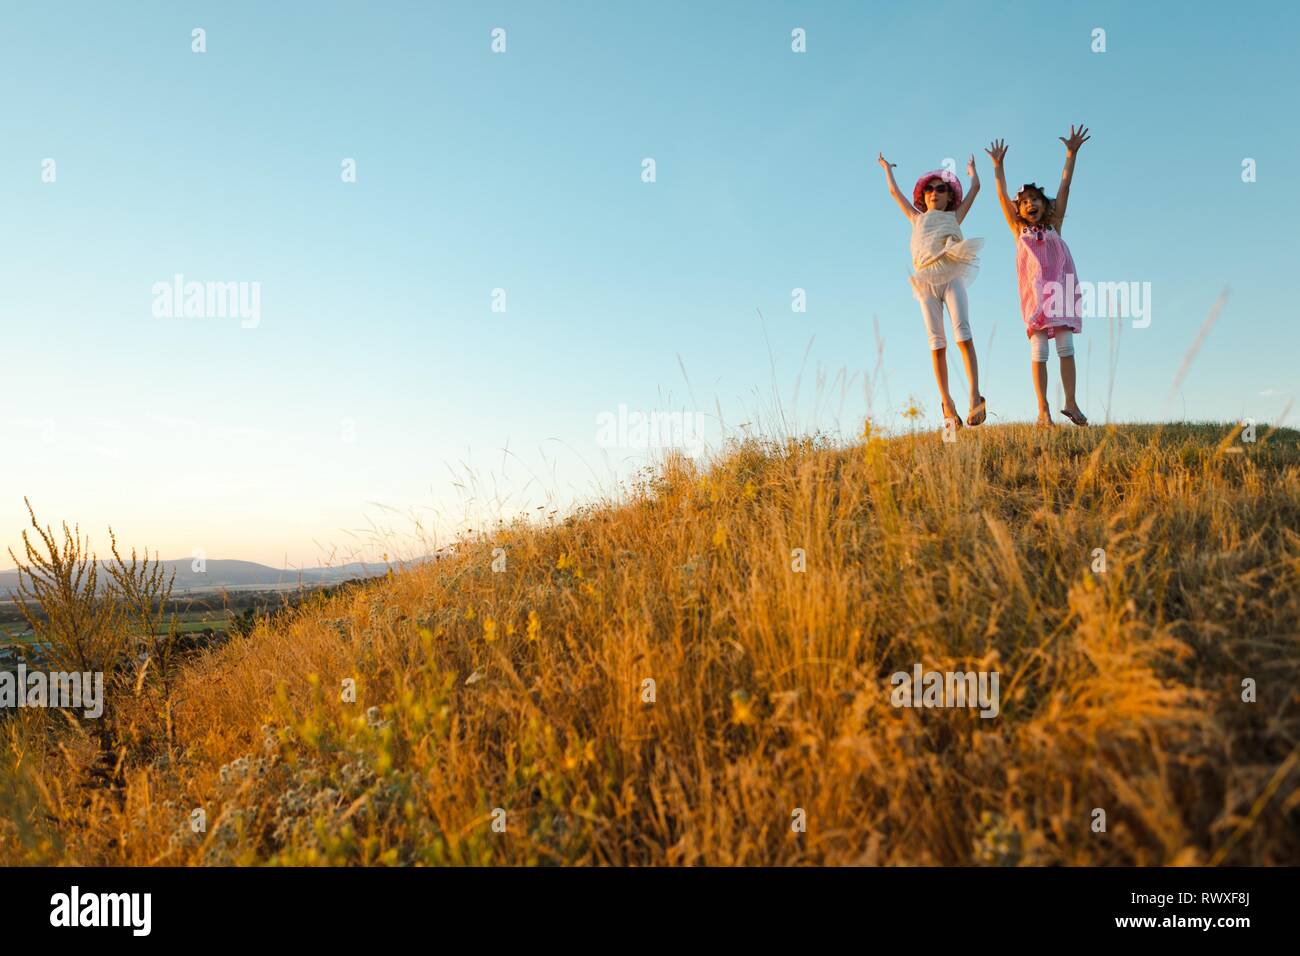 Two joyful children jumped and raised hands up. Captured emotion during sunset after summer day. Stock Photo